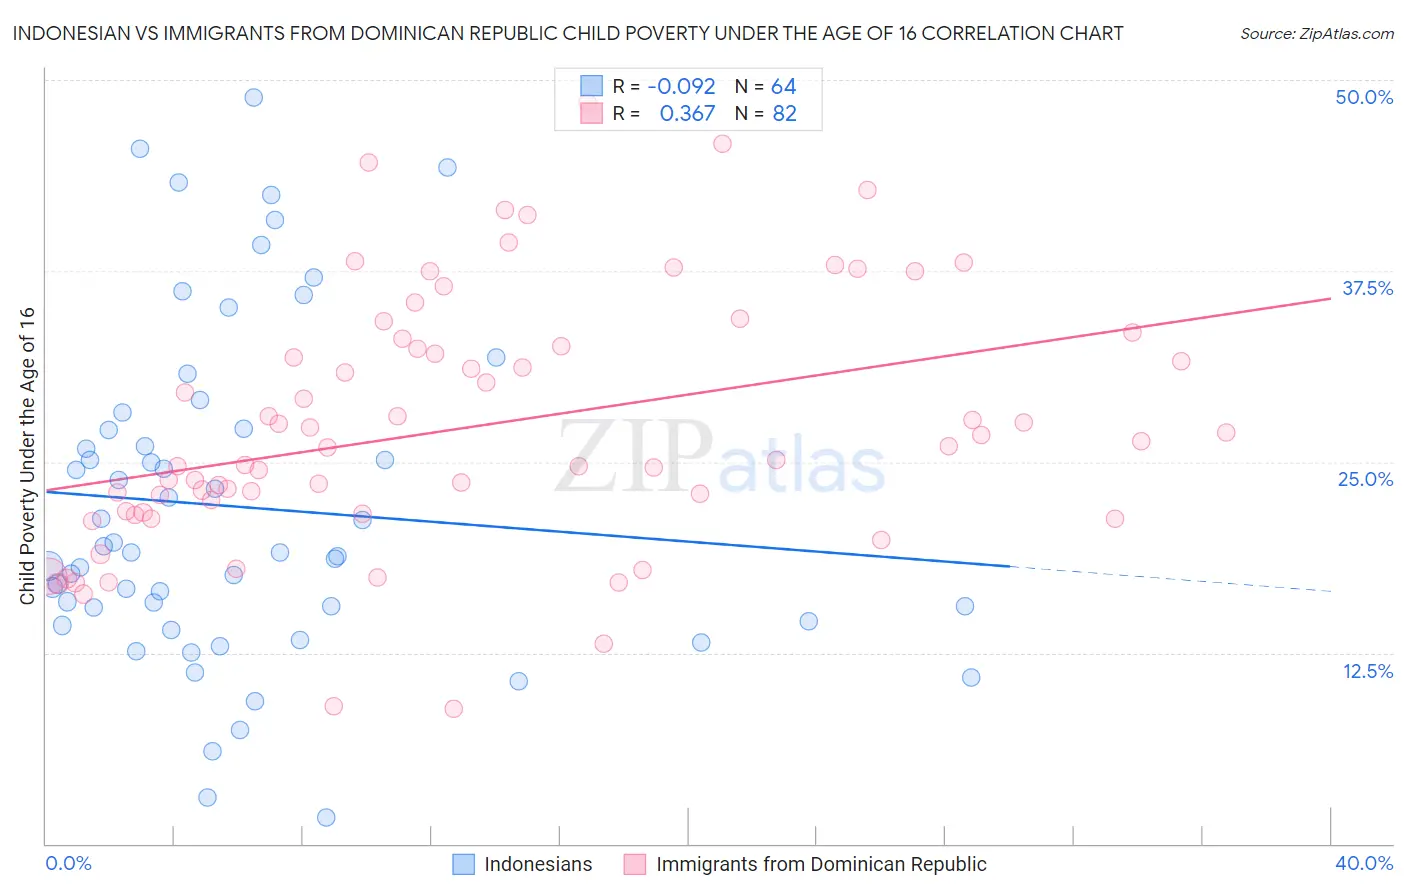 Indonesian vs Immigrants from Dominican Republic Child Poverty Under the Age of 16